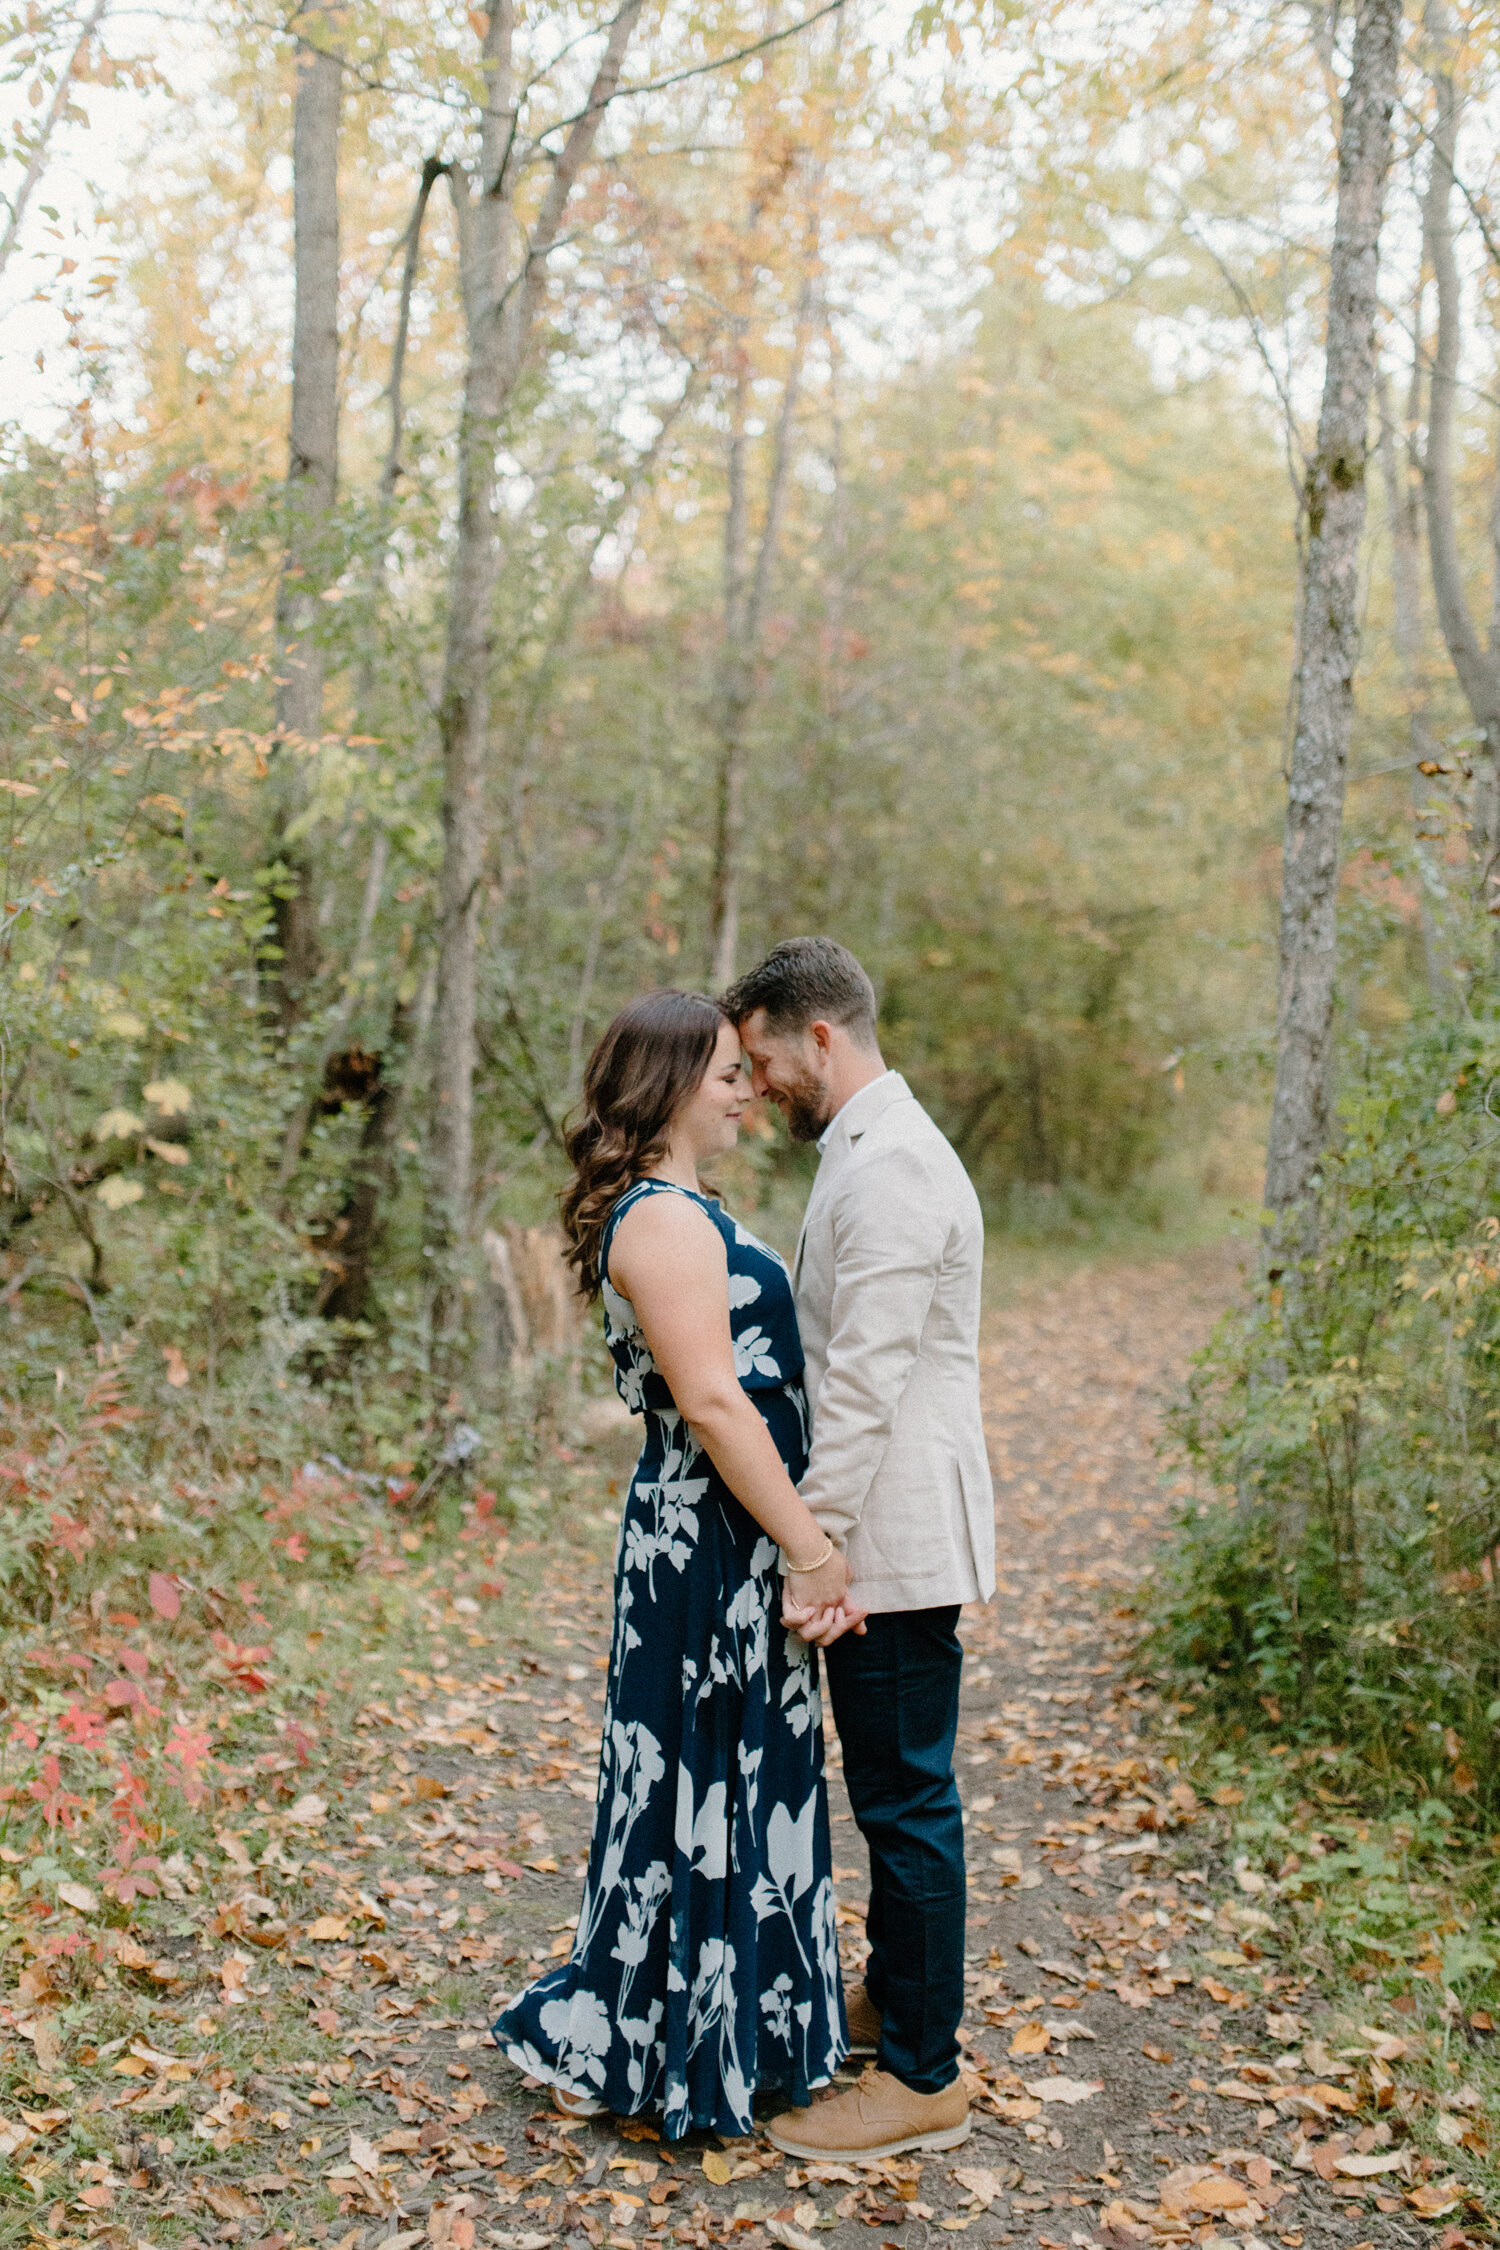  During this wooded outdoor engagement session in Ontario, Canada, Chelsea Mason Photography captures this couple romantically pressing their foreheads together and holding hands. Ontario canada engagement photographer, wooded outdoor autumn canadian